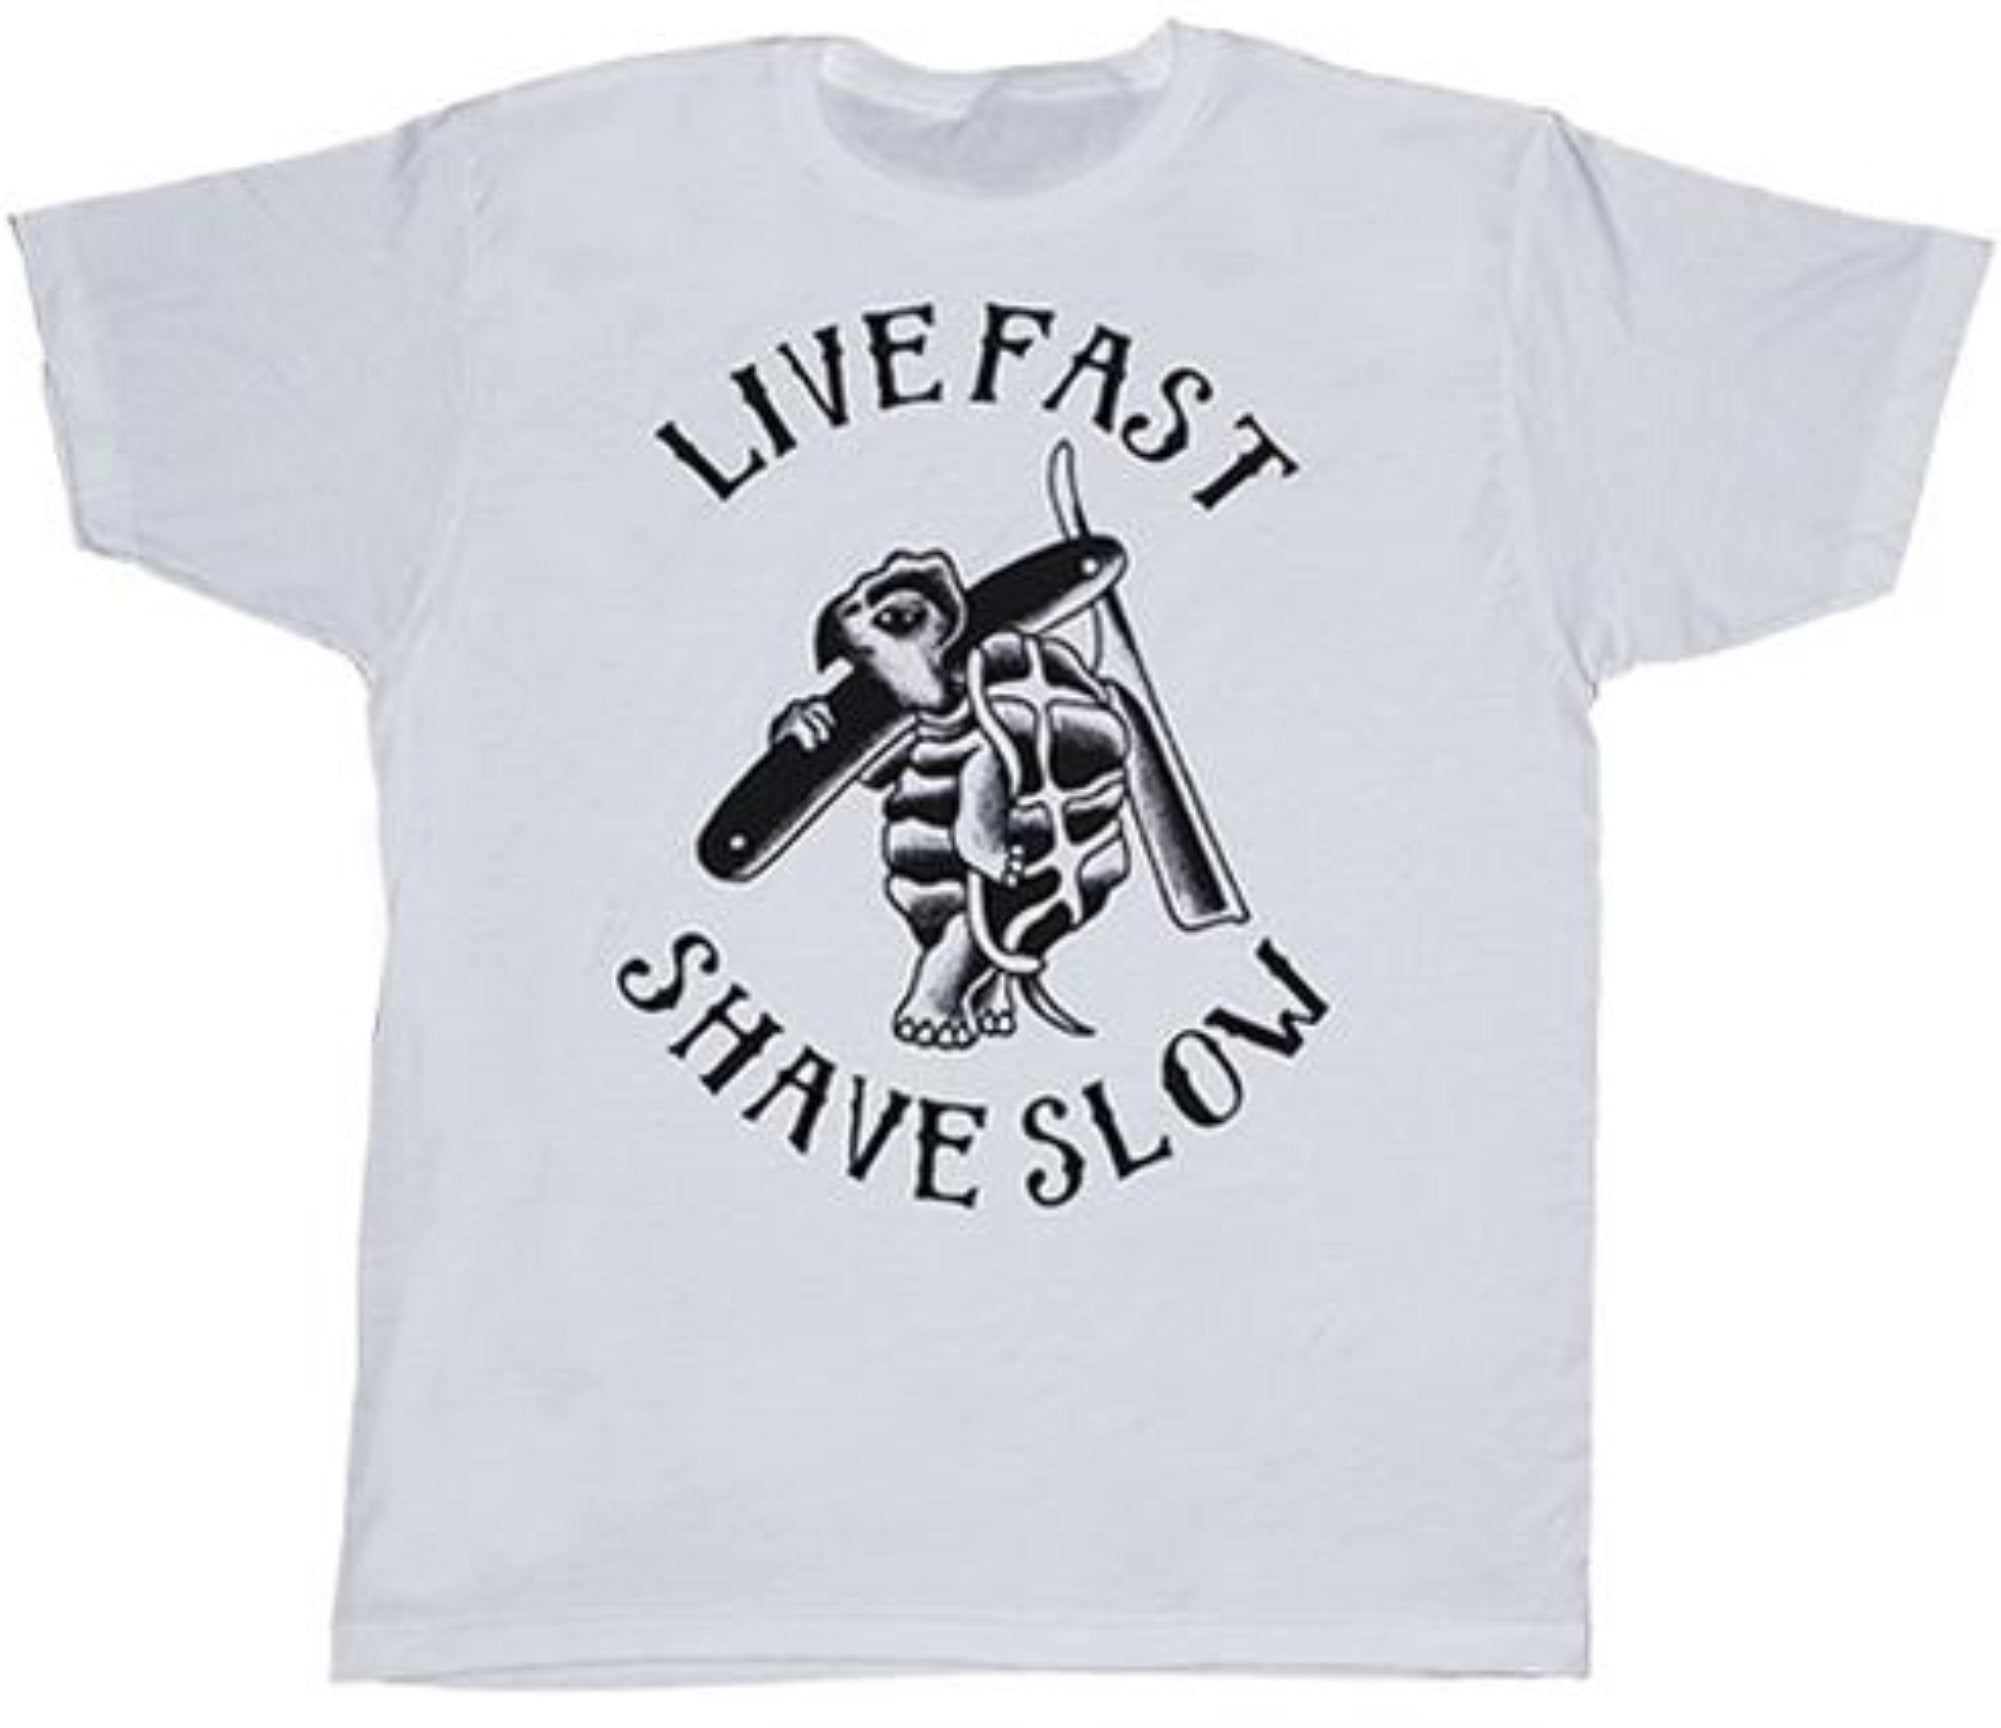 The LIVE FAST SHAVE SLOW Tee